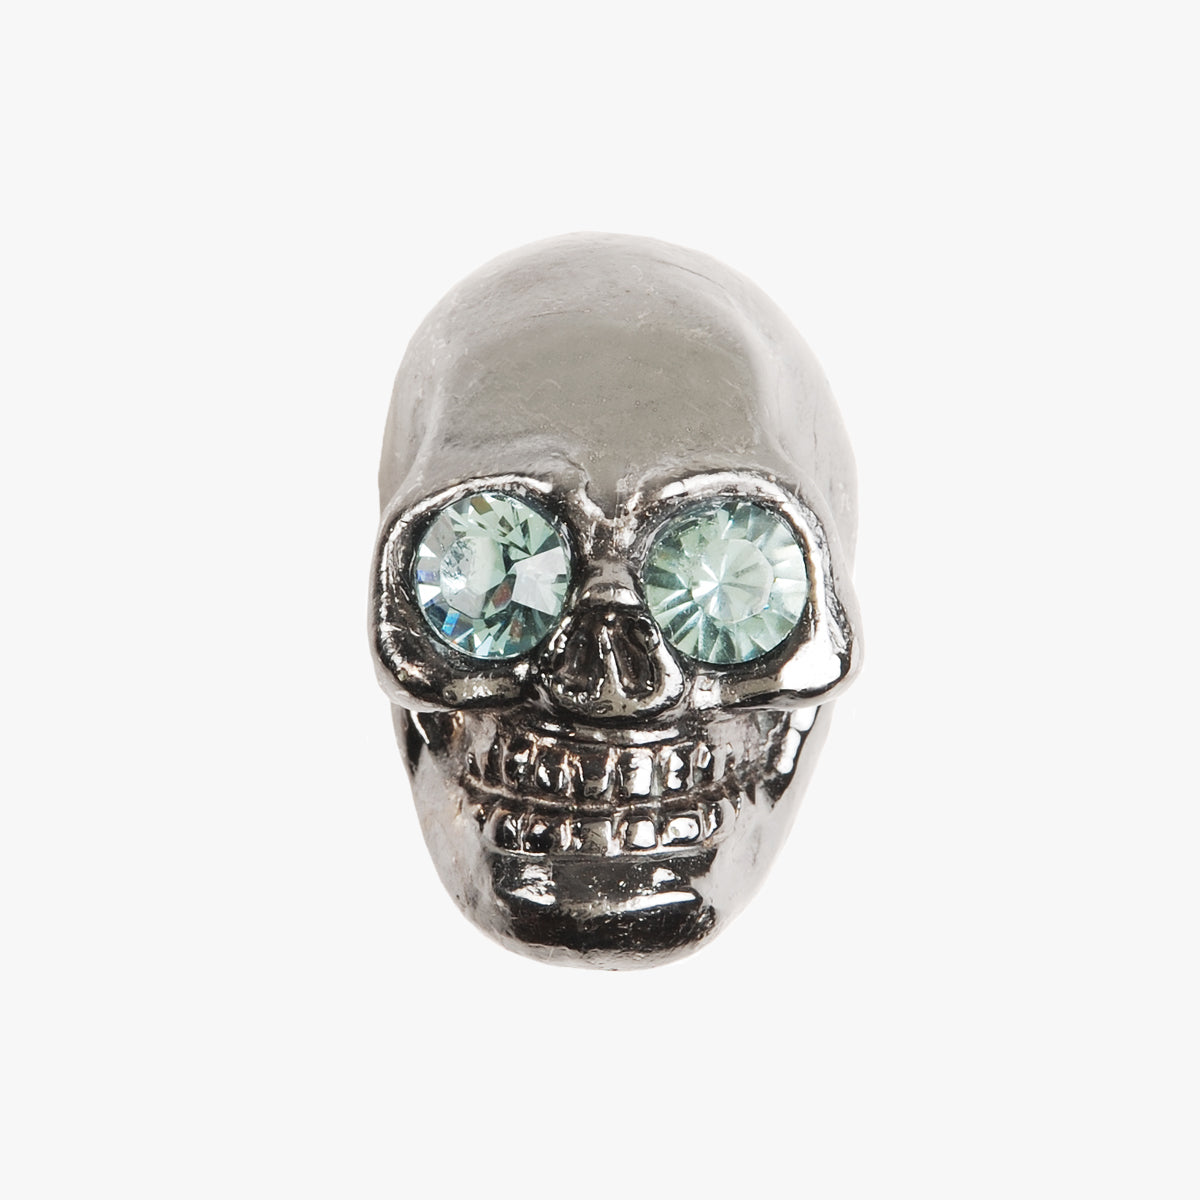 Skull knob handmade with crystal and polished nickel by Matthew Studios